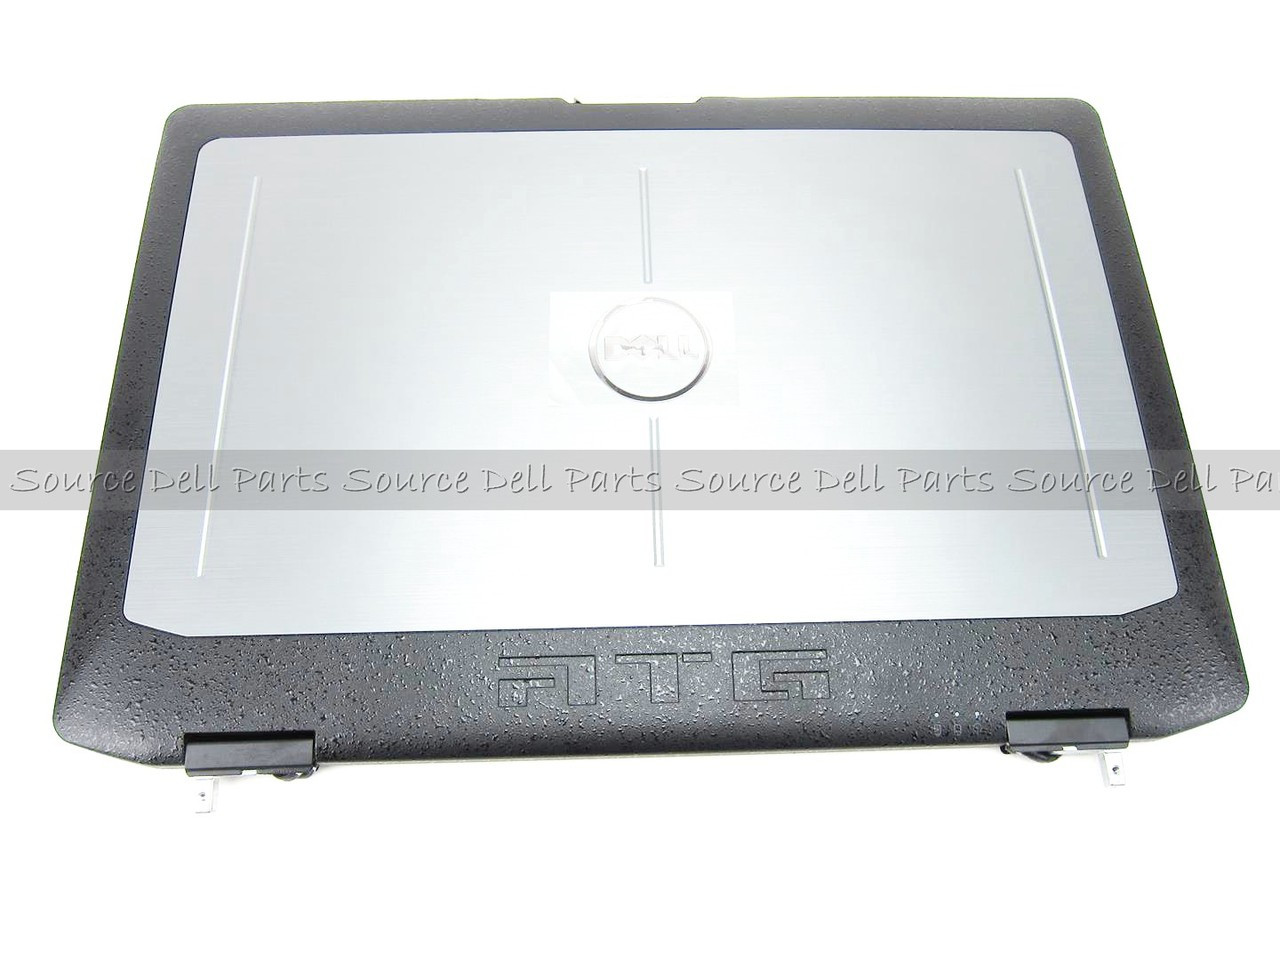 Dell Latitude E6430 ATG Touchscreen 14" LCD Back Cover Lid & Hinges - CPDRV (B)